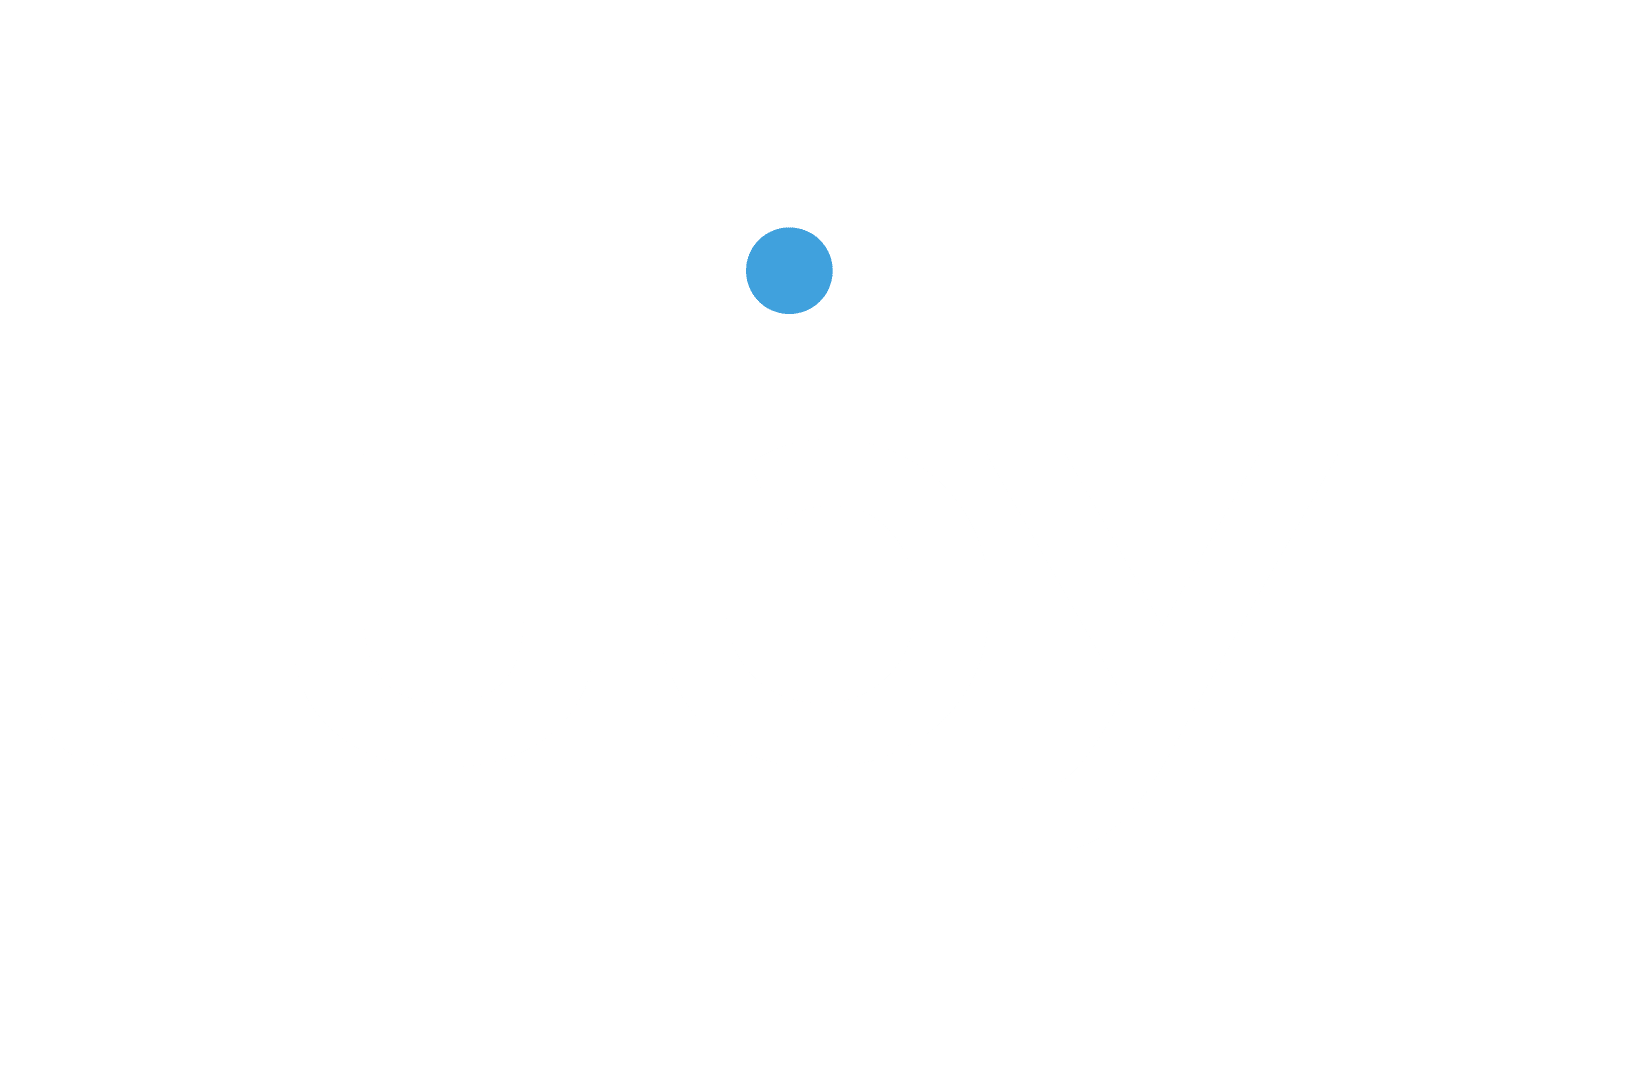 Banking Evolution Luby Software